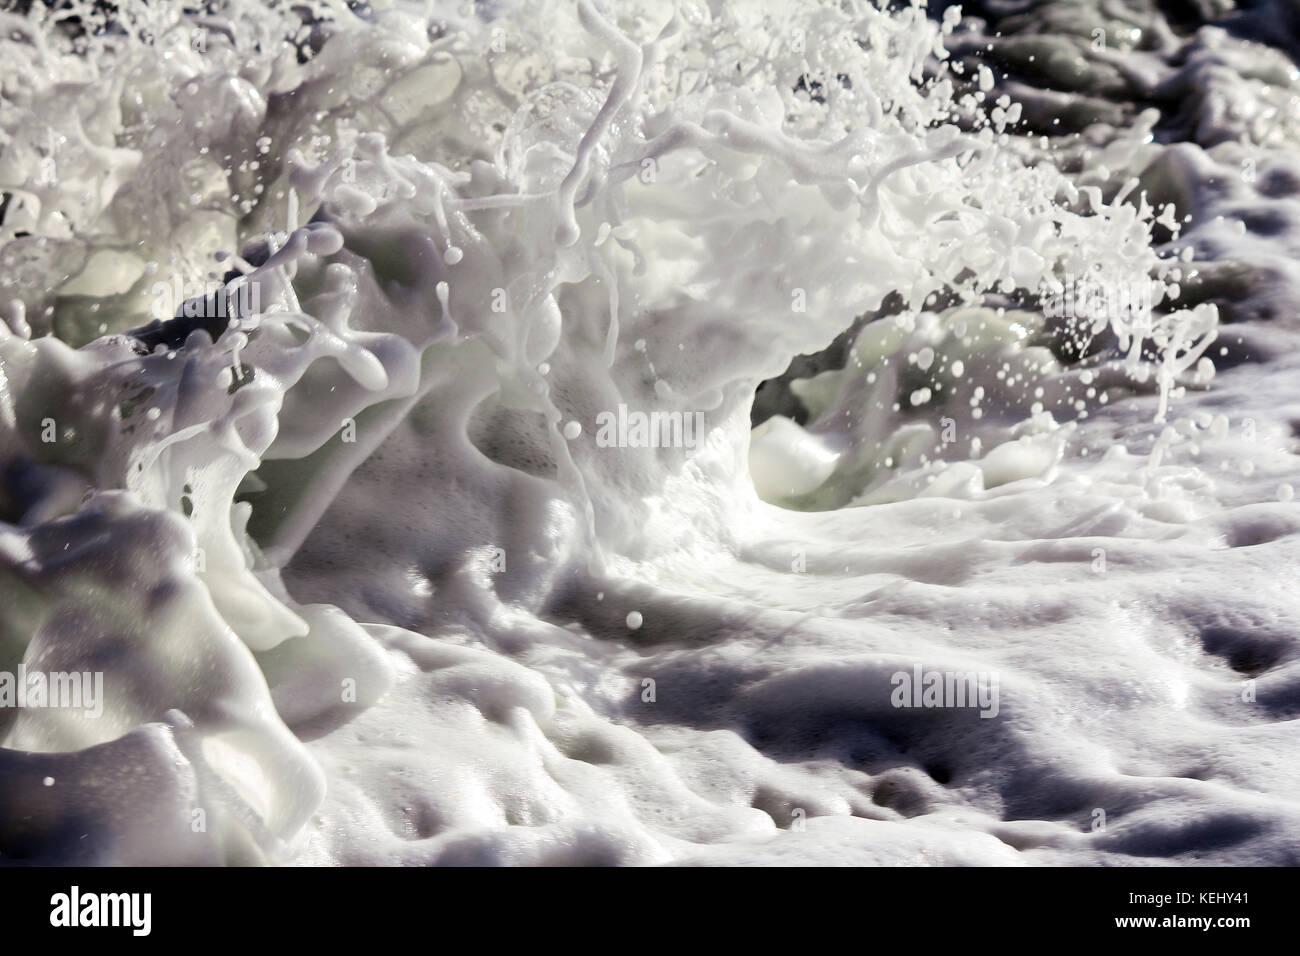 Macrowave. A study of the intricacy of sea foam in a crashing wave. Stock Photo